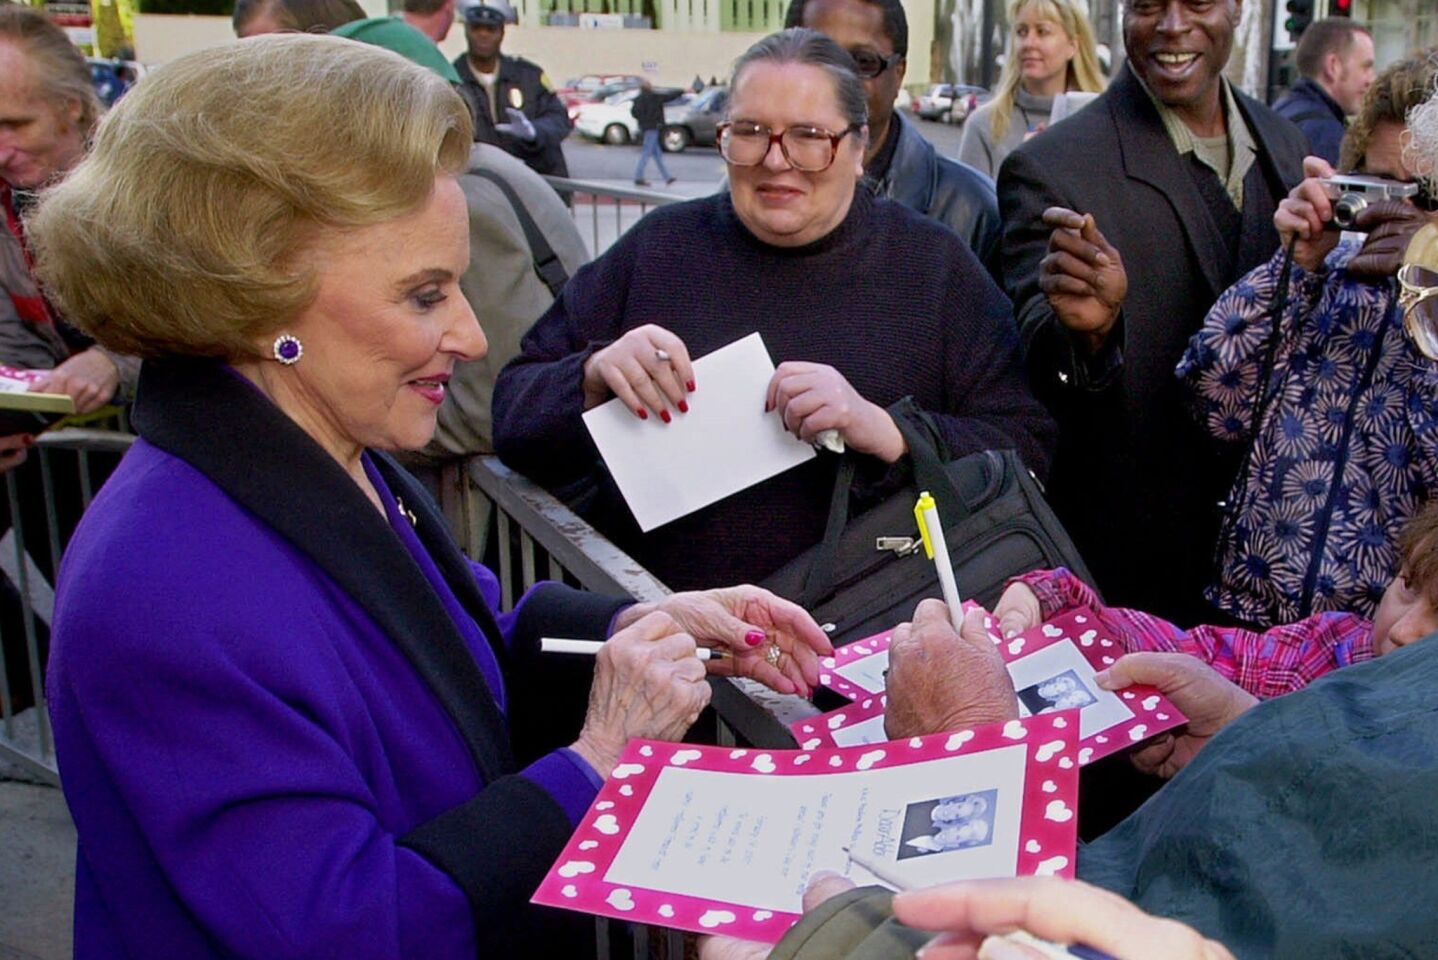 Pauline Friedman Phillips signs autographs after the dedication of a "Dear Abby" star on the Hollywood Walk of Fame.